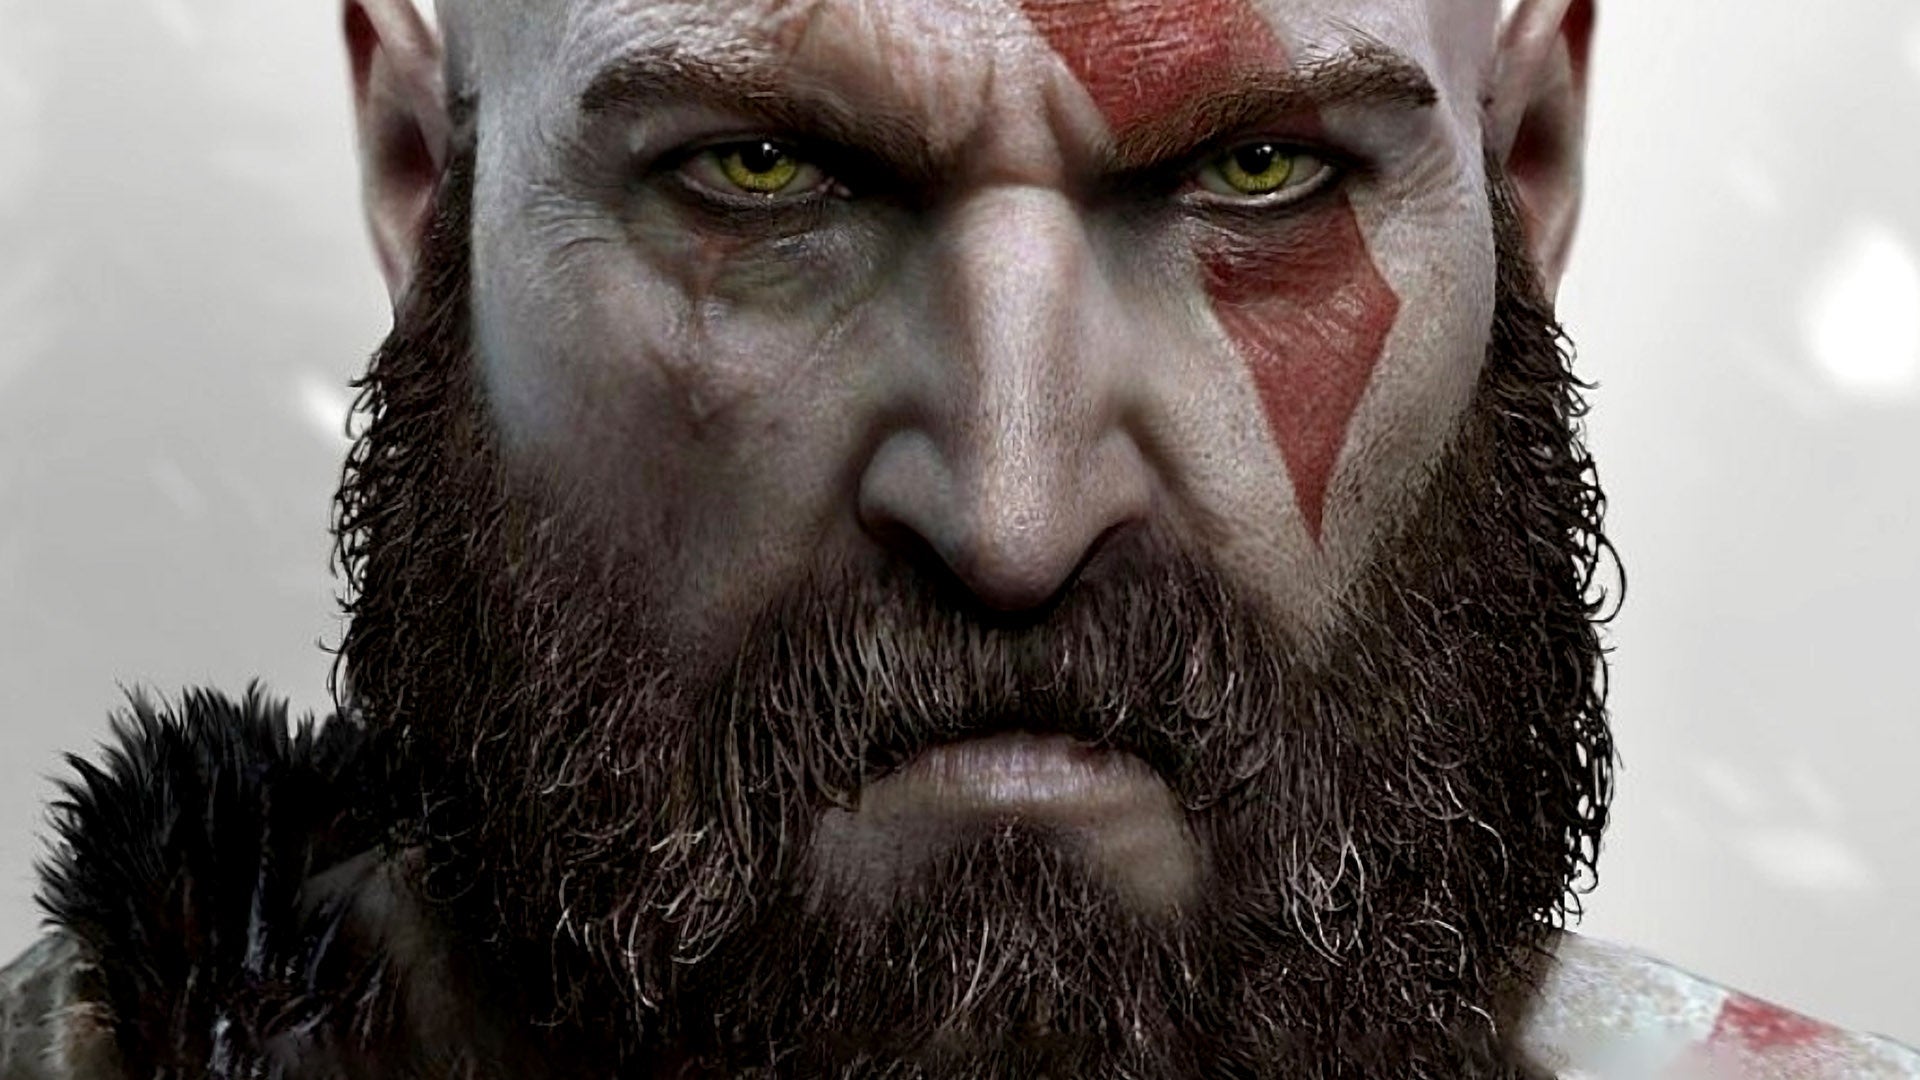 Get Free God Of War PS4 Theme And Avatar Set To Celebrate First Anniversary   GameSpot